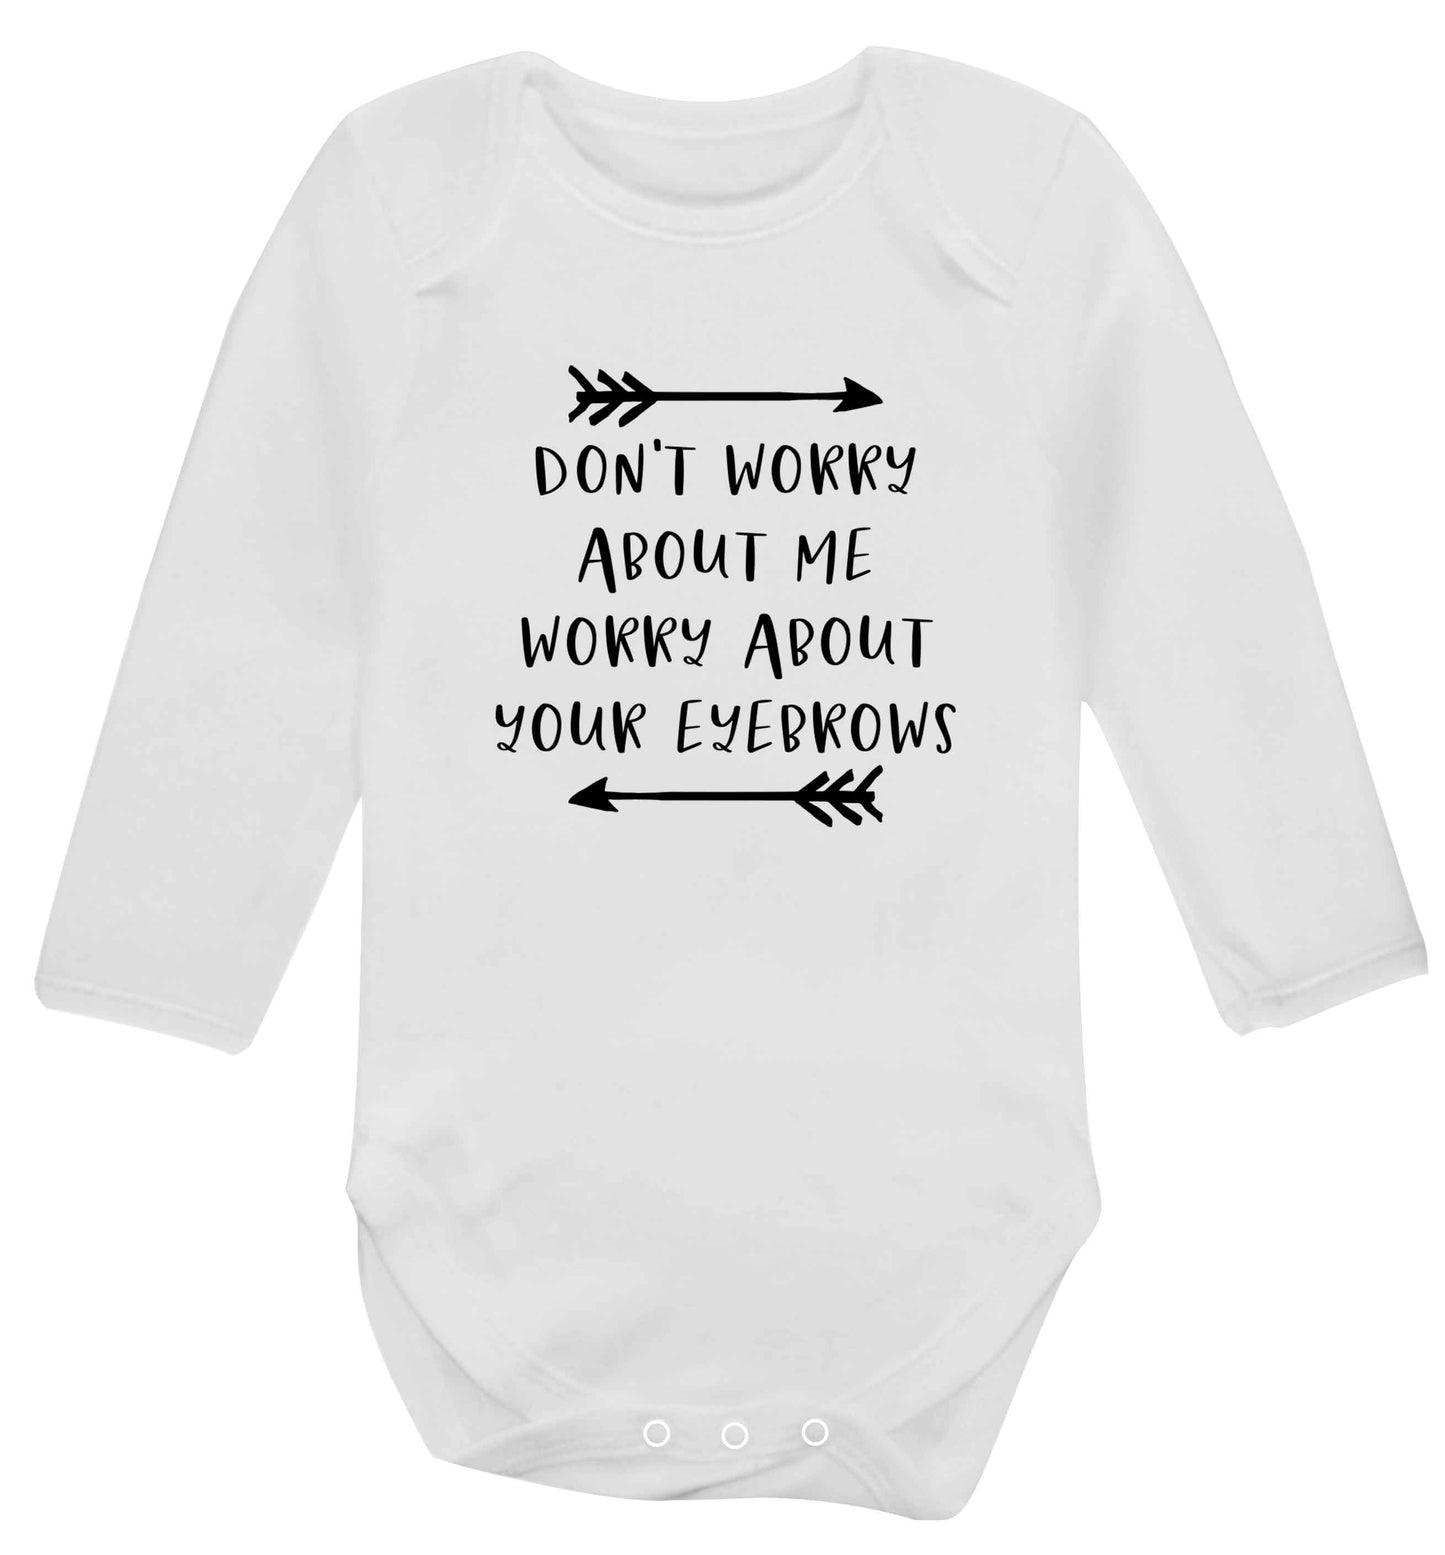 Don't worry about me worry about your eyebrows baby vest long sleeved white 6-12 months